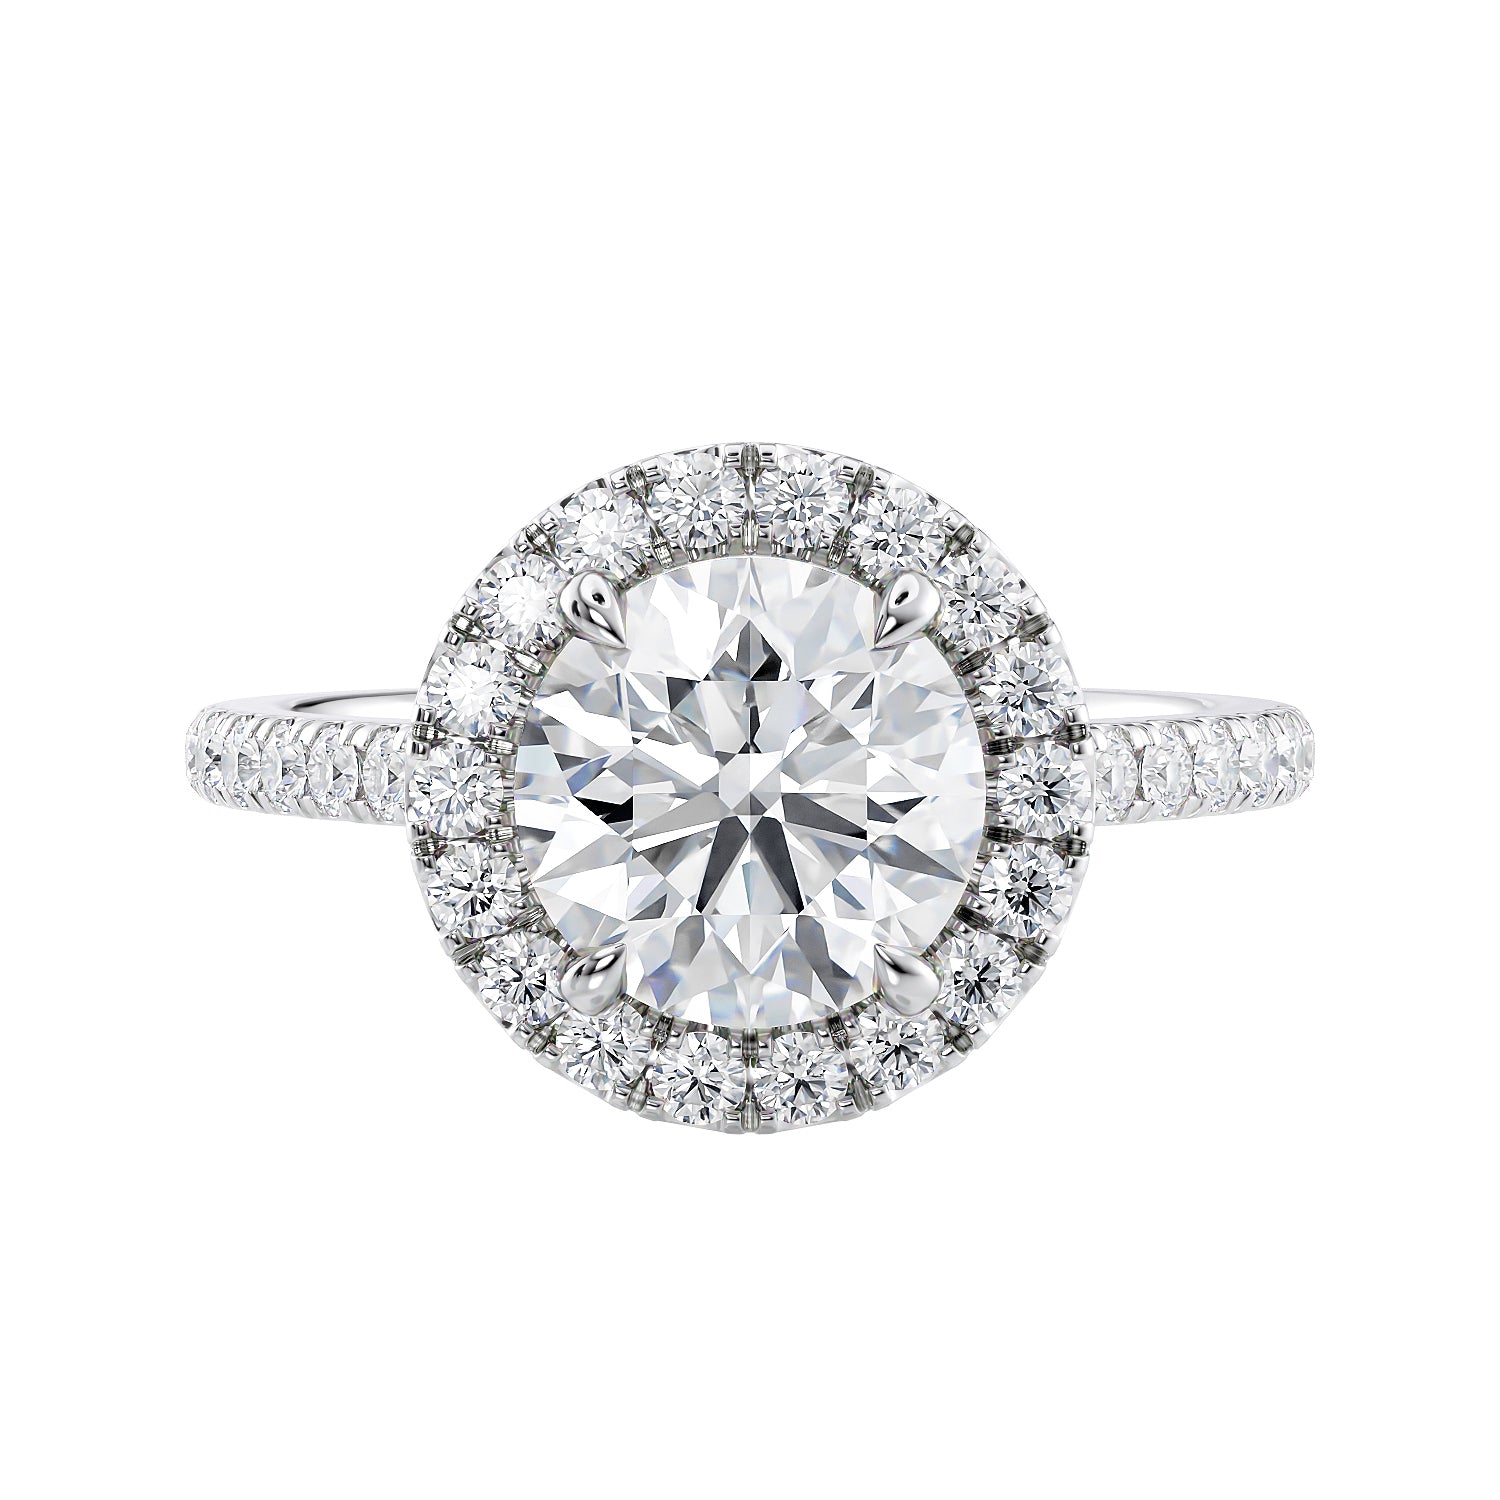 1.5 carat round cut lab grown diamond halo engagement ring with diamond band white gold front view.